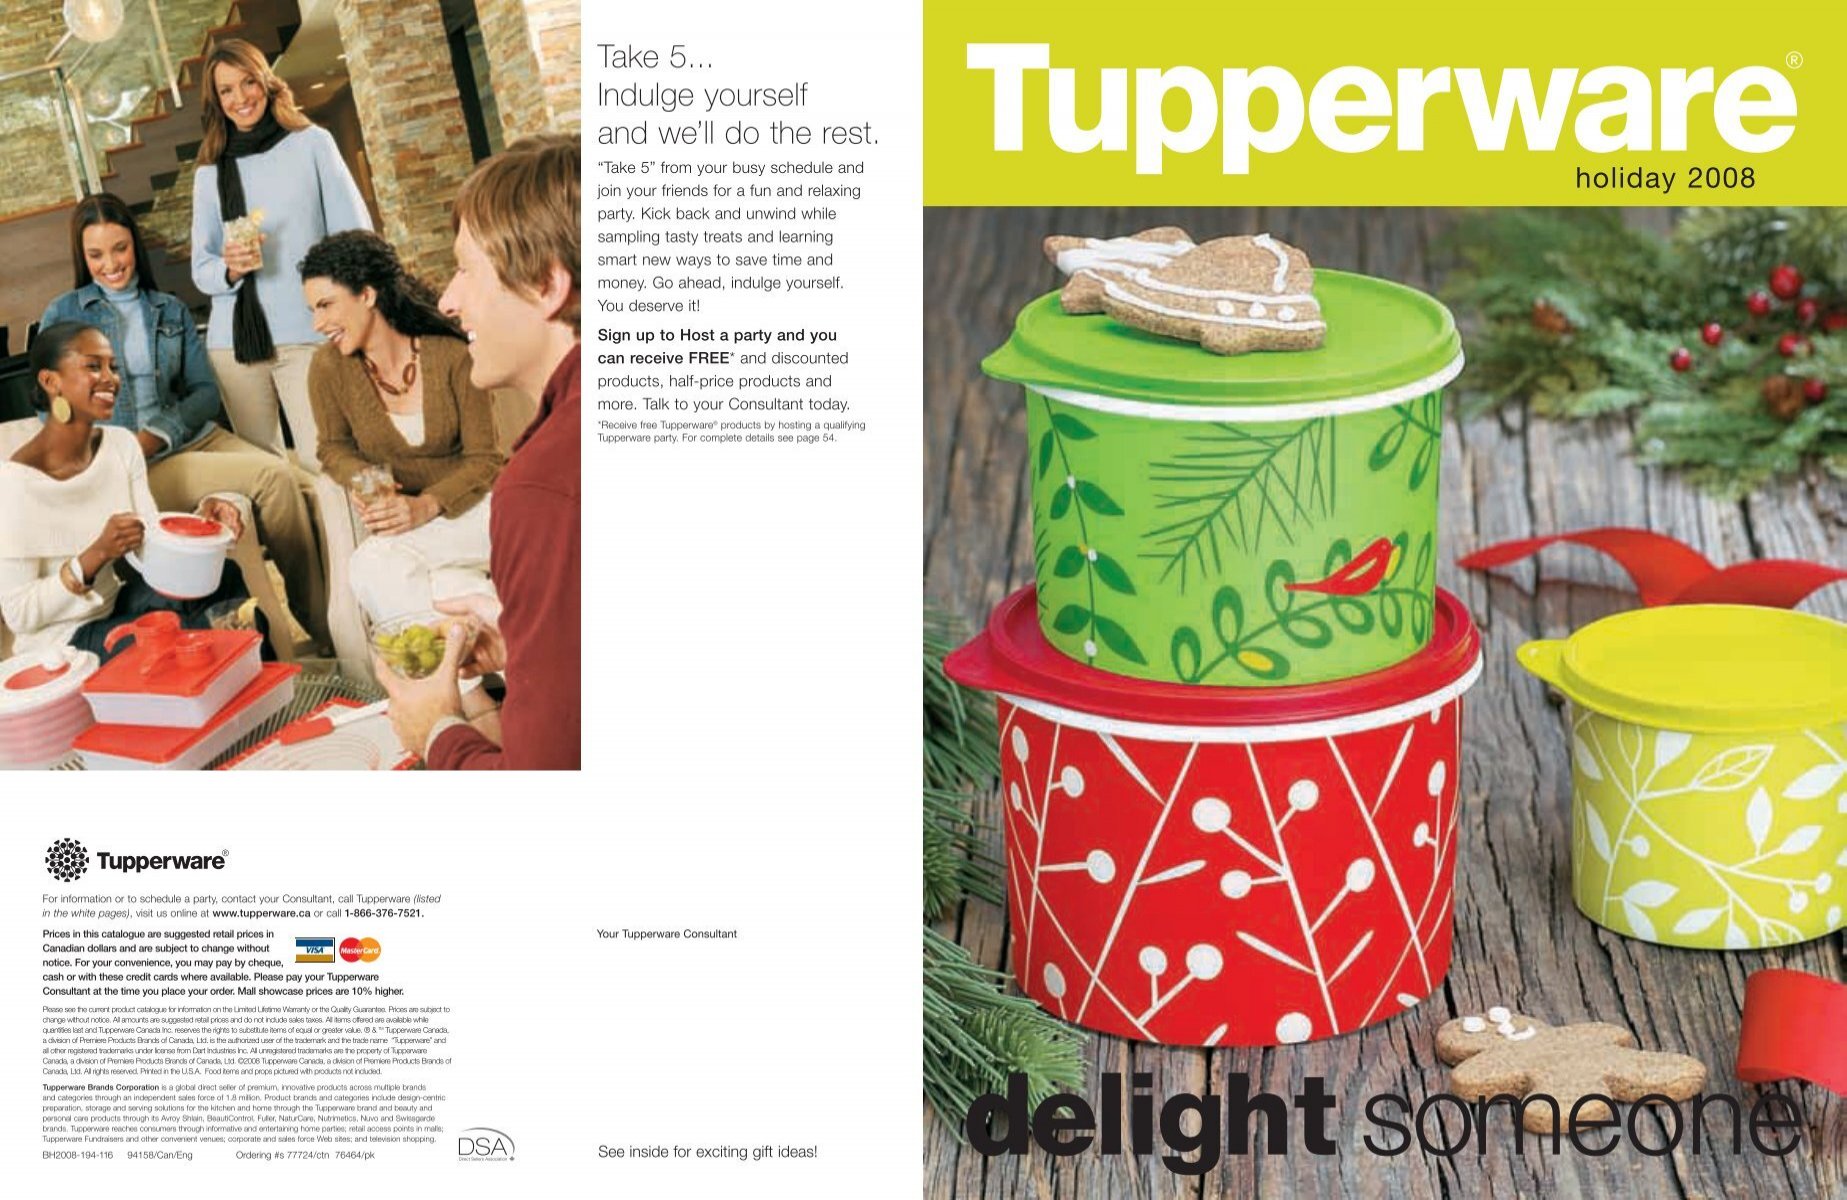 Tupperware Canada, a division of Premiere Products